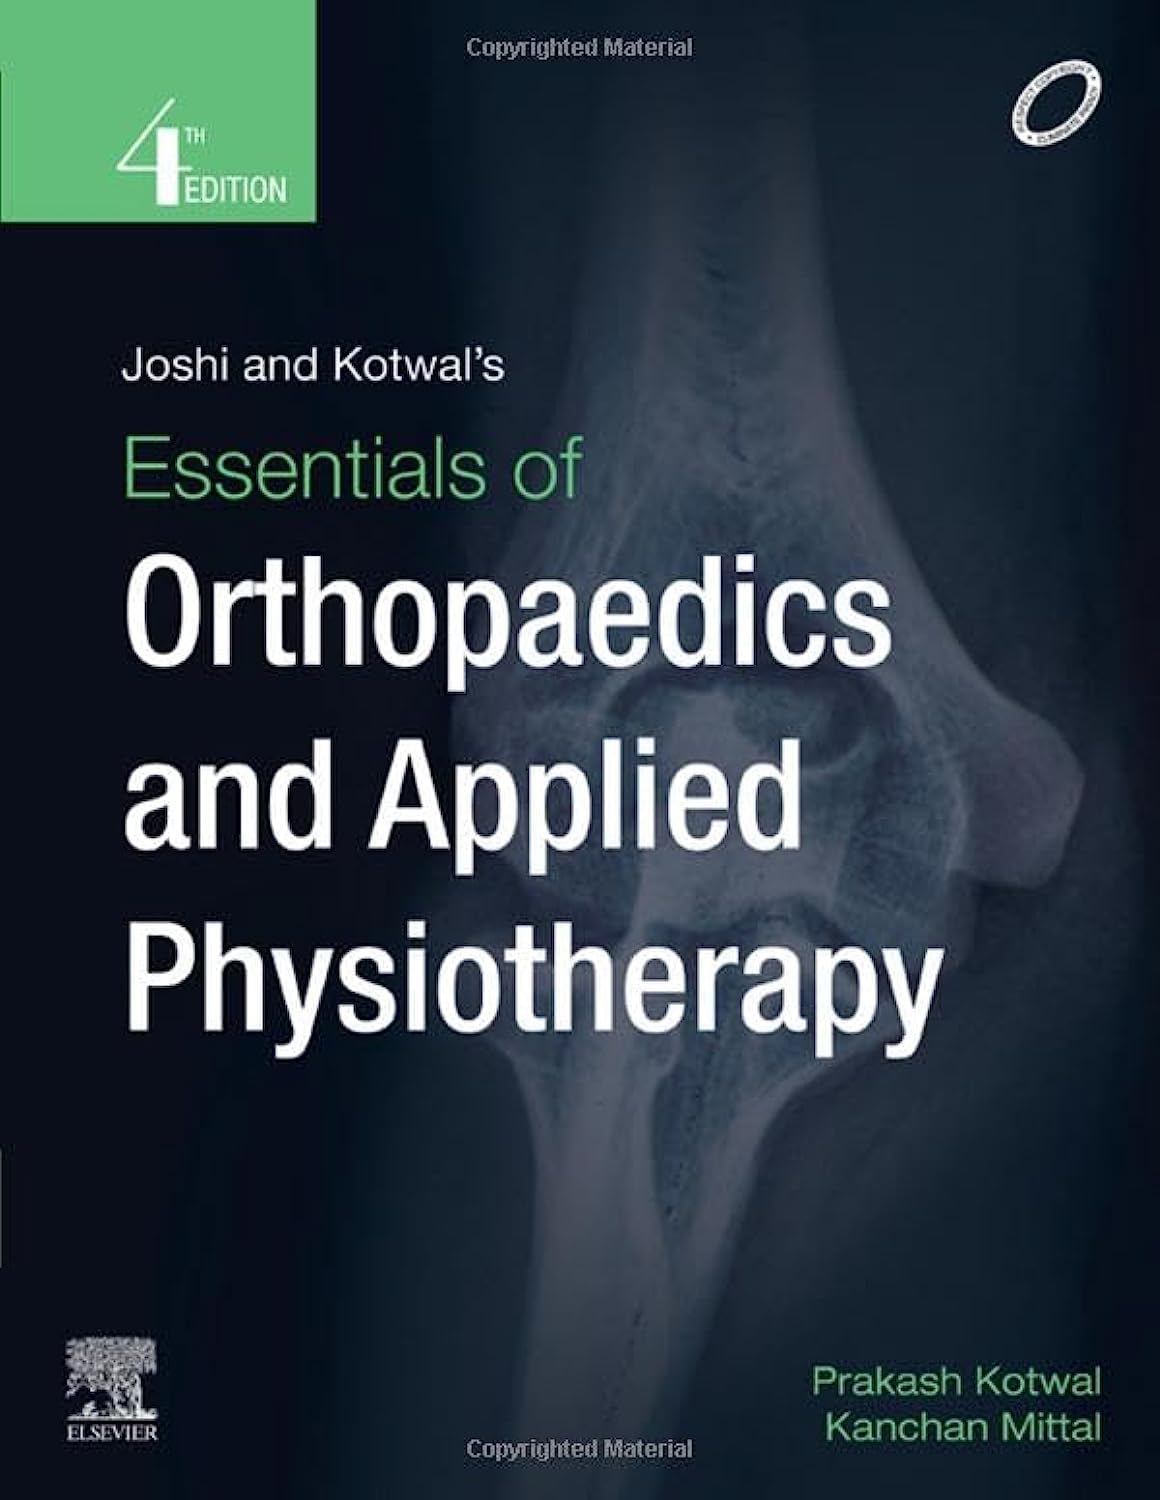 Joshi and Kotwal s Essentials of Orthopedics and Applied Physiotherapy, 4th edition by Prakash P Kotwal